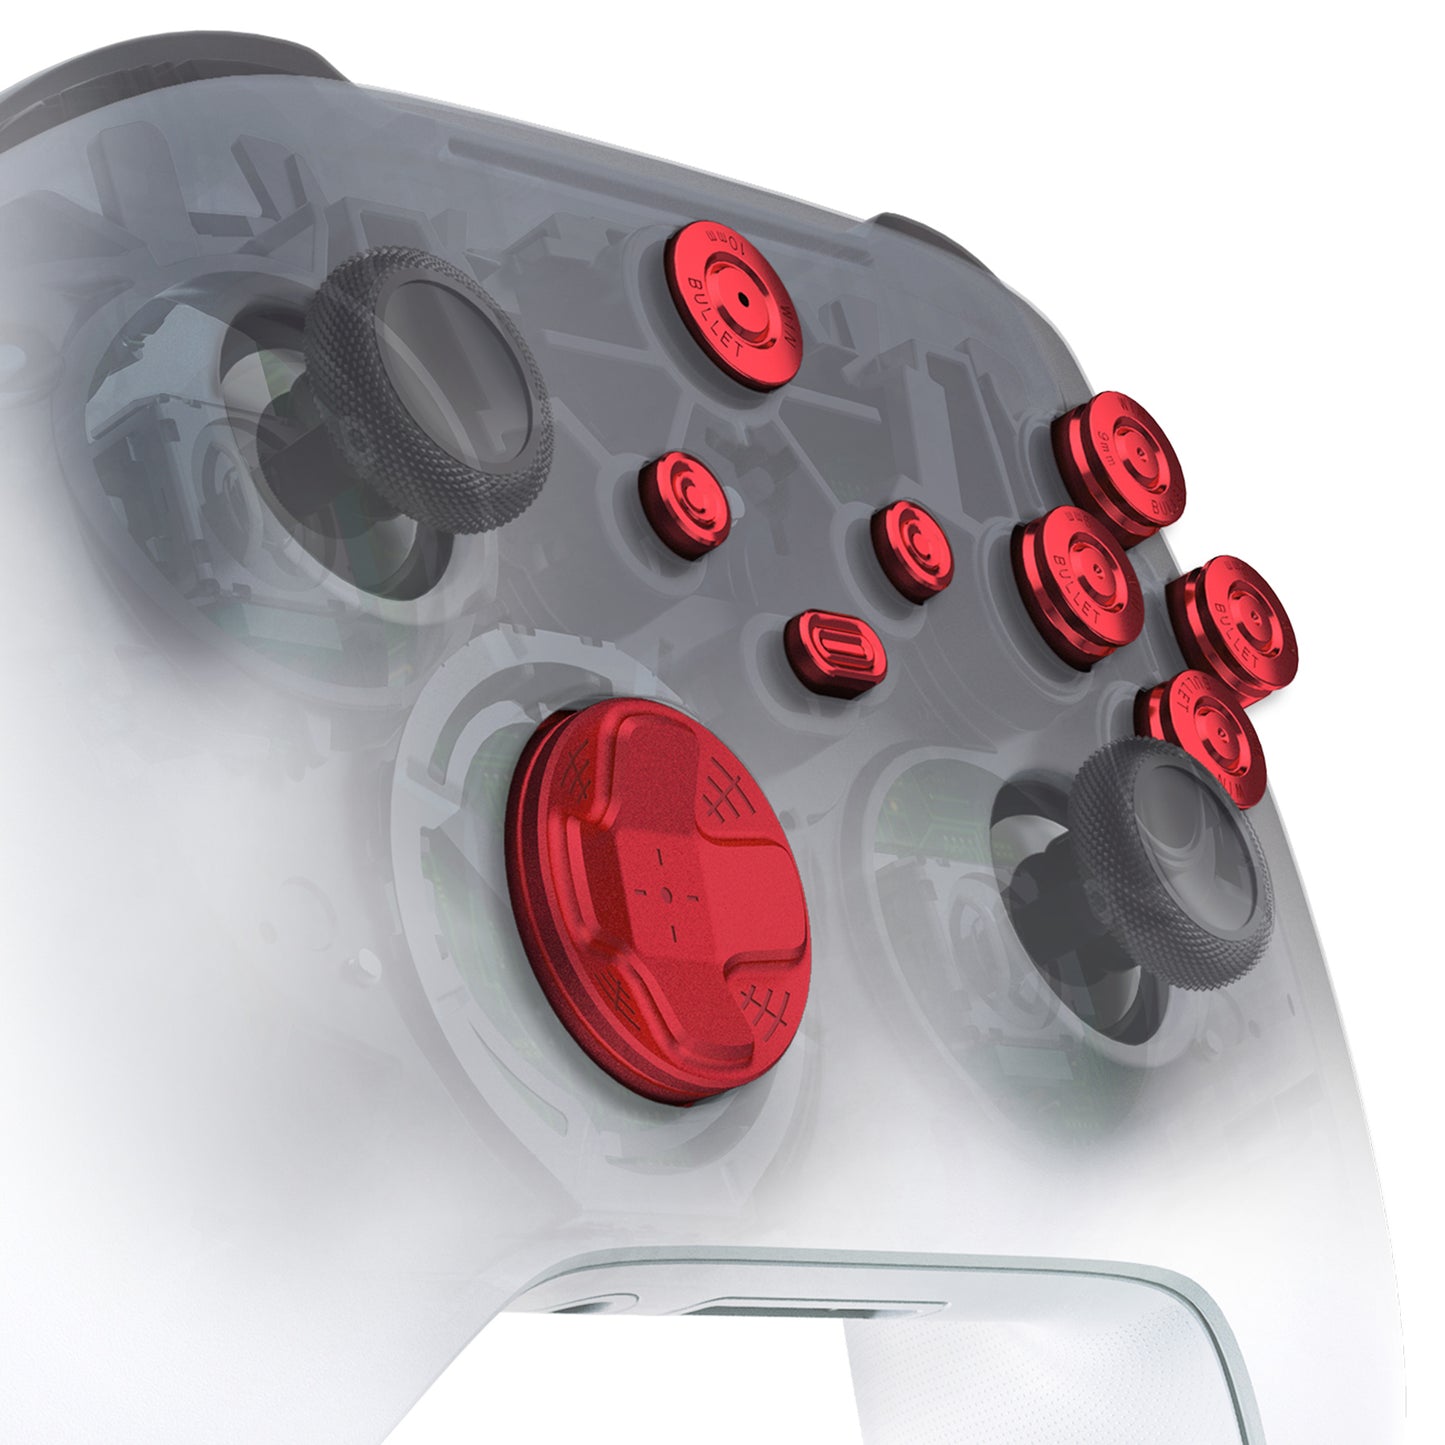 eXtremeRate Retail eXtremeRate 9 in 1 Custom Red Metal Buttons for Xbox Series X/S Controller, Replacement Aluminum Alloy Dpad Start Back Share Button, Home ABXY Bullet Buttons for Xbox Core Controller - JX3D003